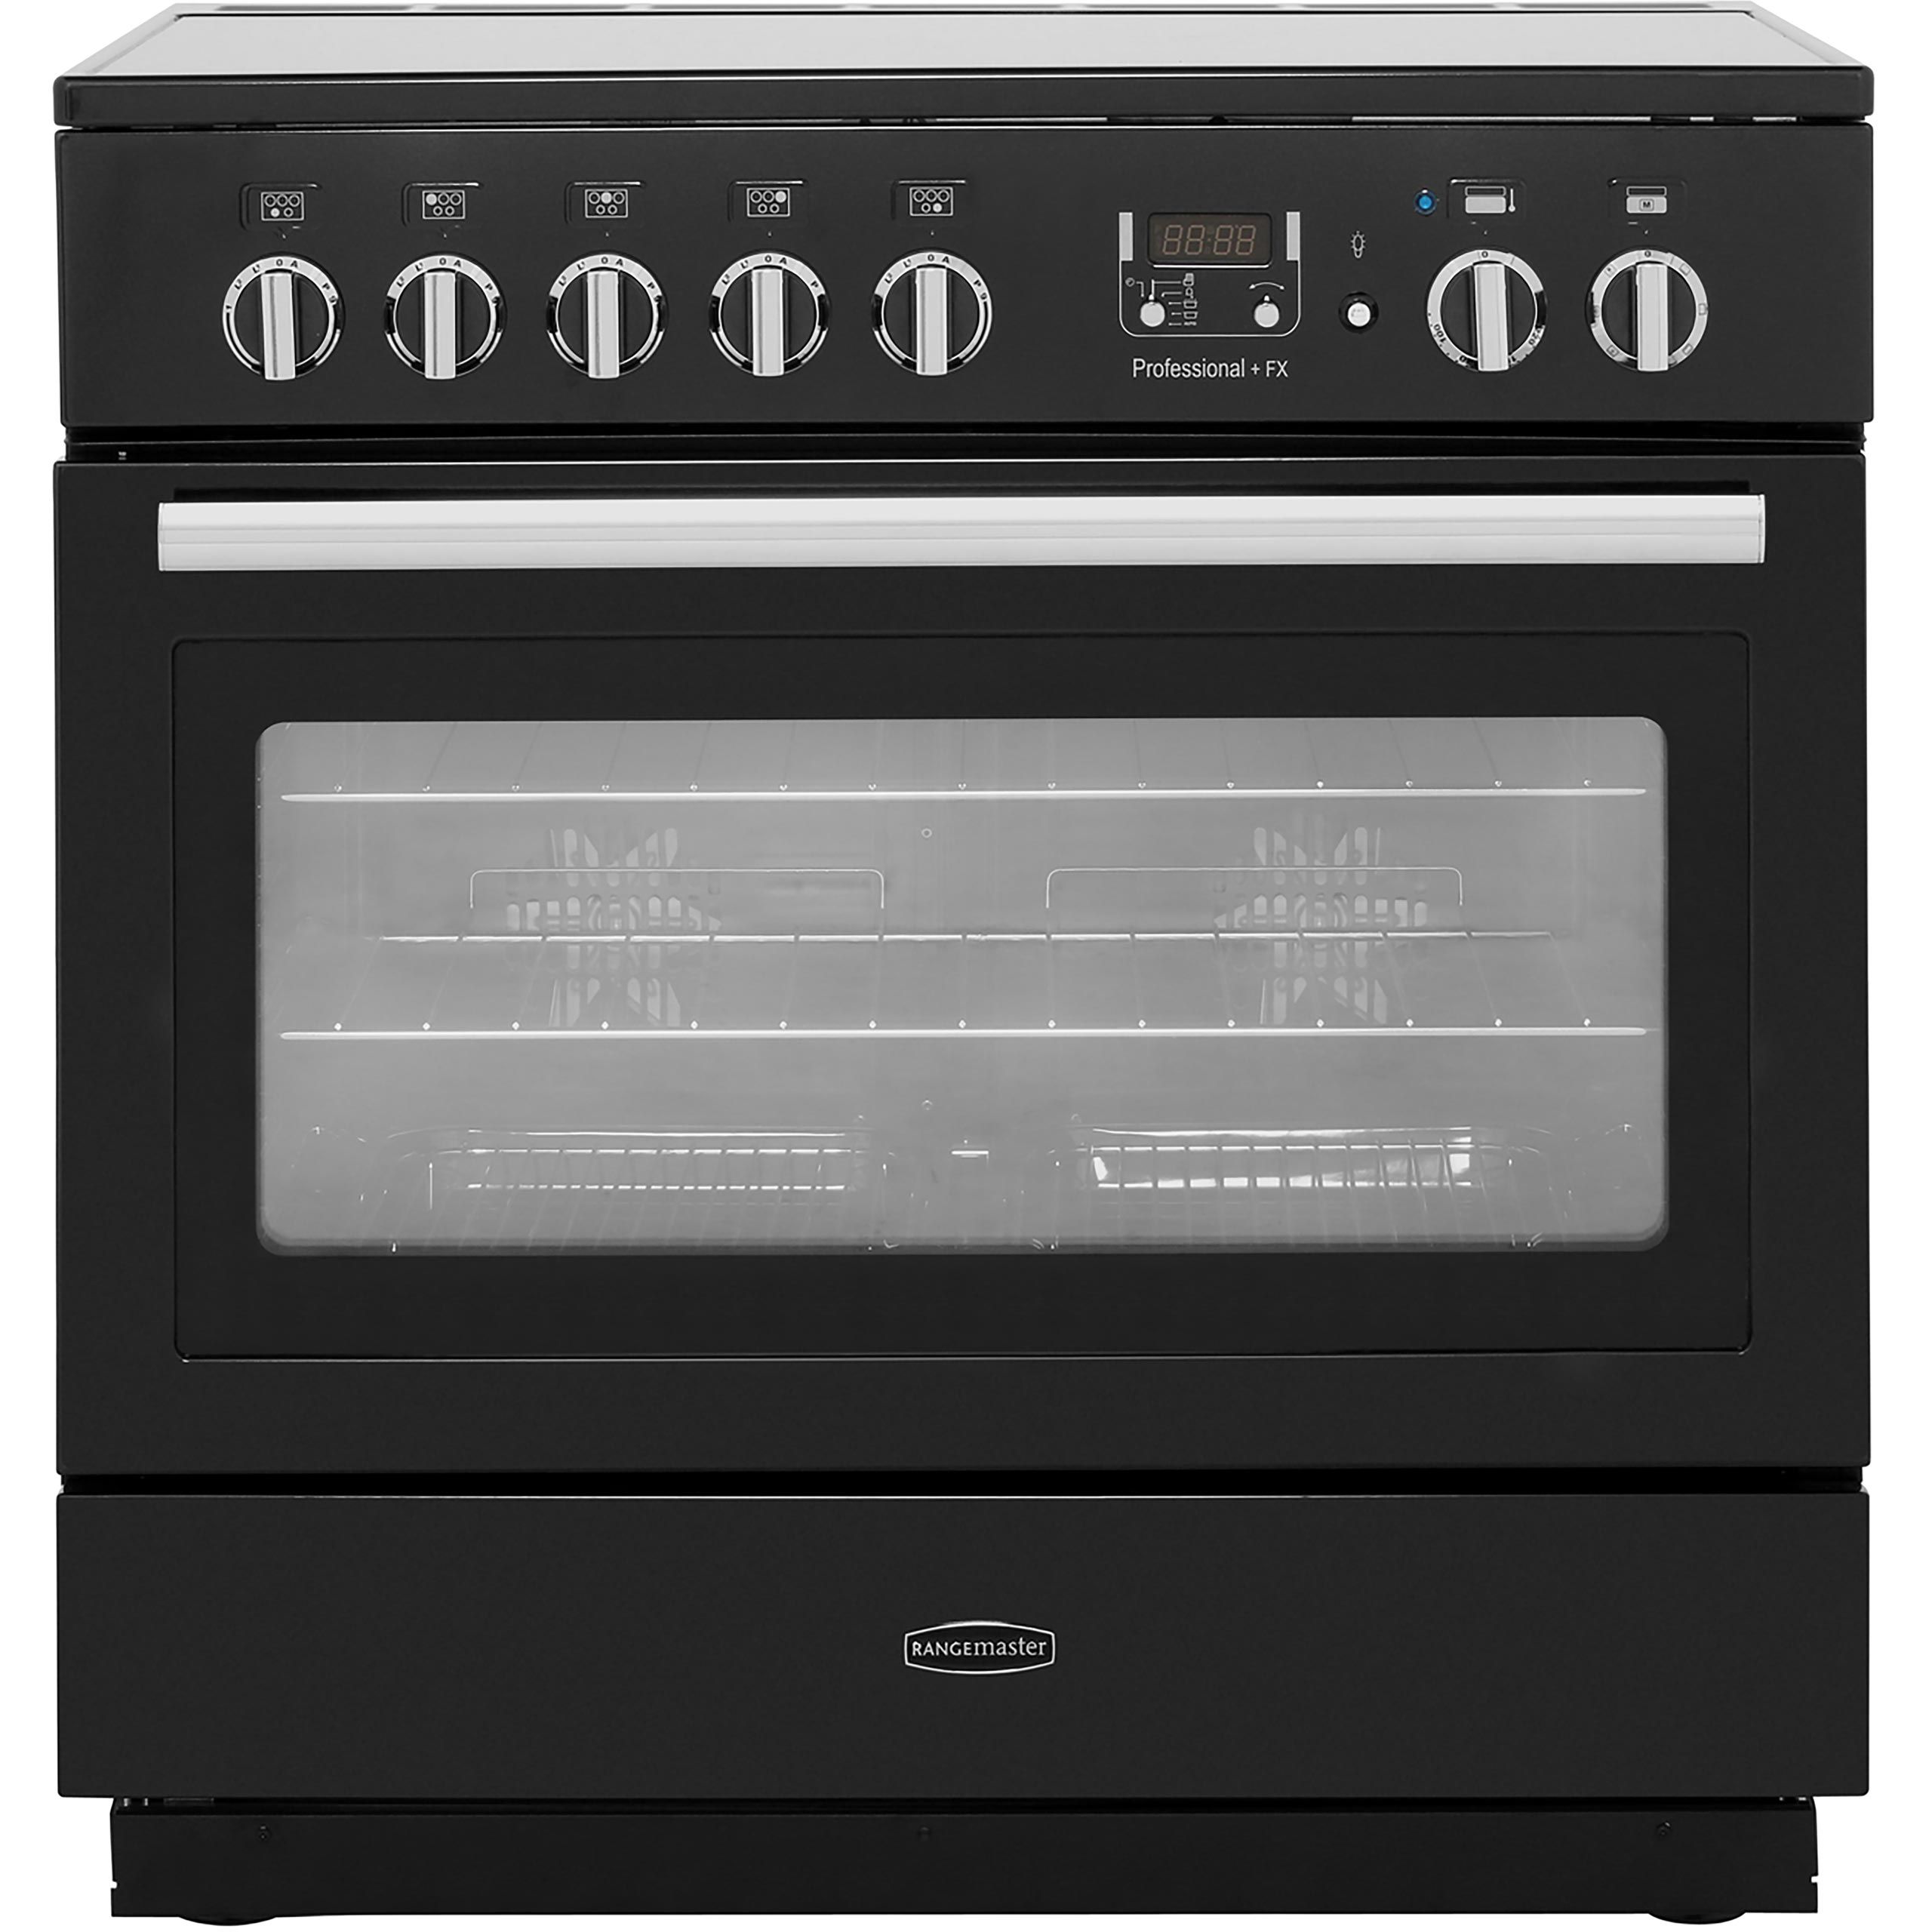 Rangemaster Professional Plus FX PROP90FXEIGB/C 90cm Electric Range Cooker with Induction Hob - Black - A Rated, Black